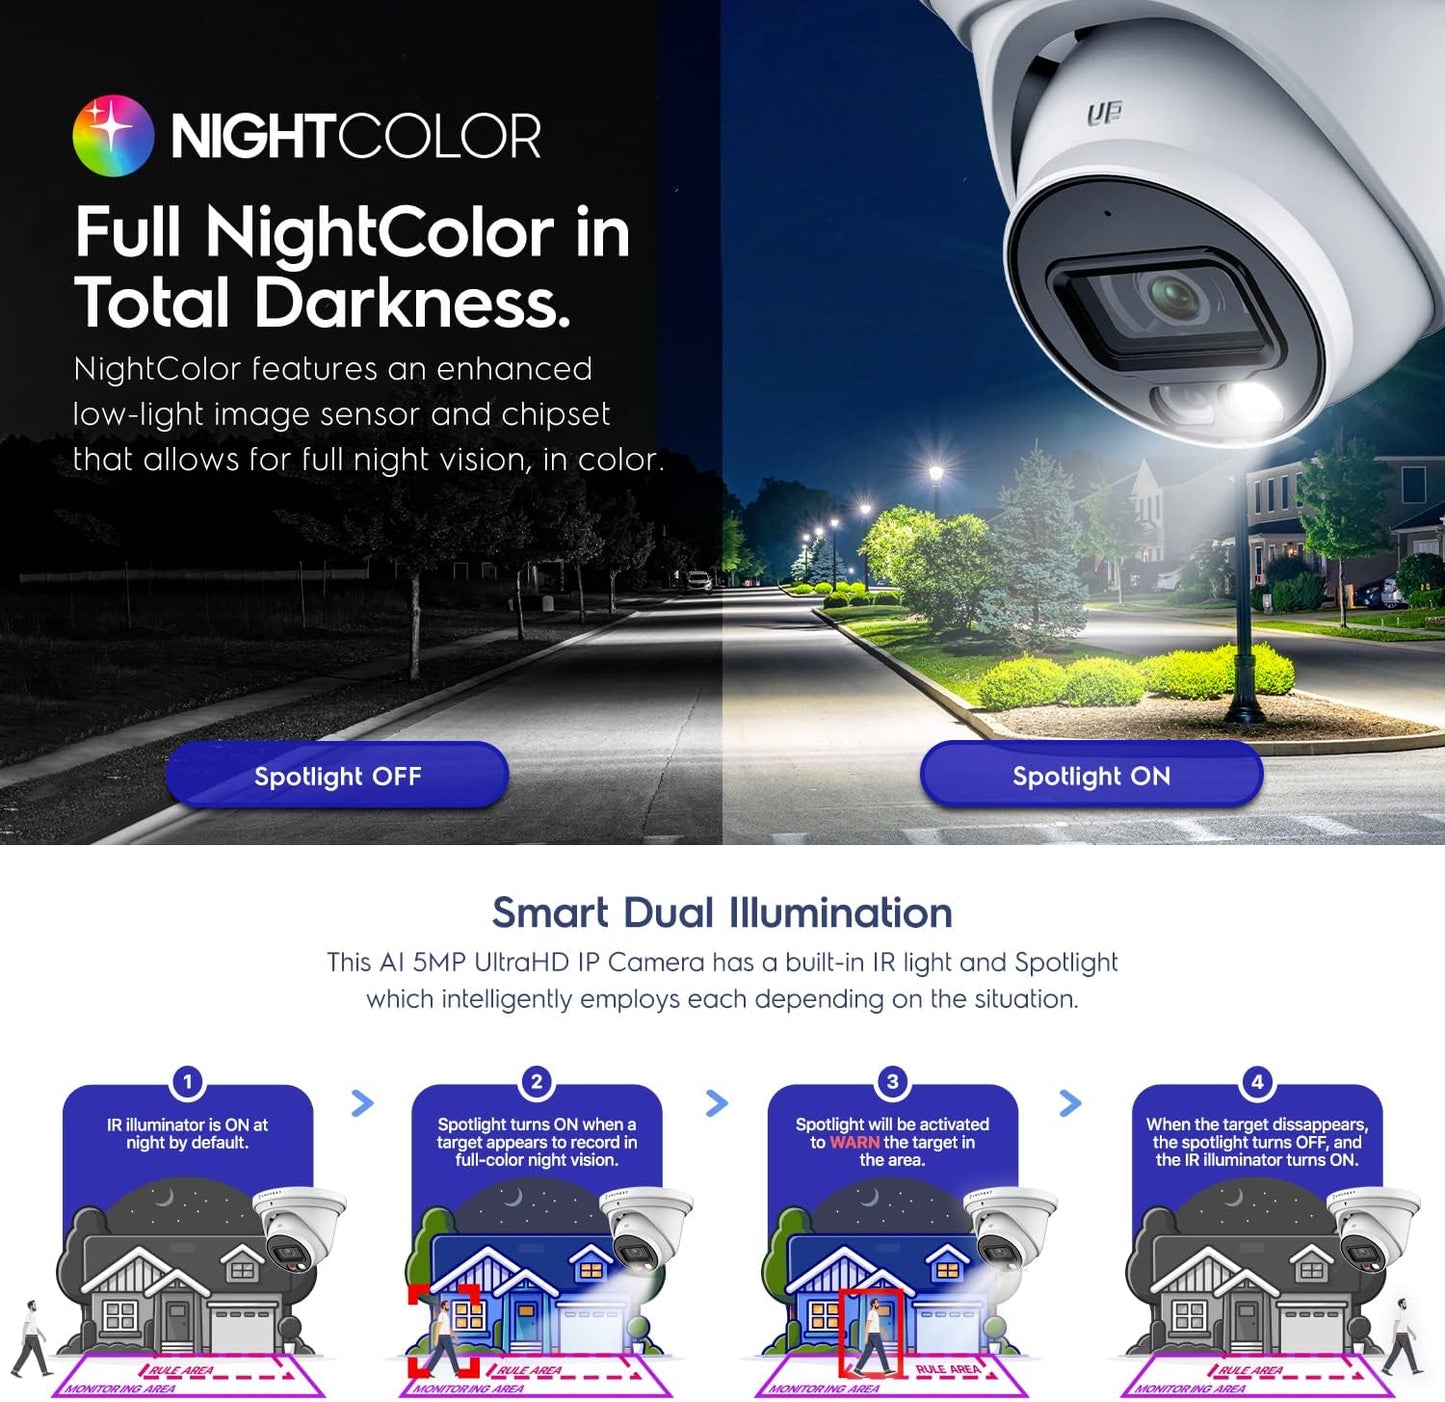 Amcrest 2PACK 5MP IP PoE AI Camera w/ 49ft Color Night Vision, Security Outdoor Turret Camera, Built-in Mic, 2X 60ft Cat6E Cable, Active Deterrent, 129 FOV, 5MP@20fps IP5M-T1277EW2-CAT6E60